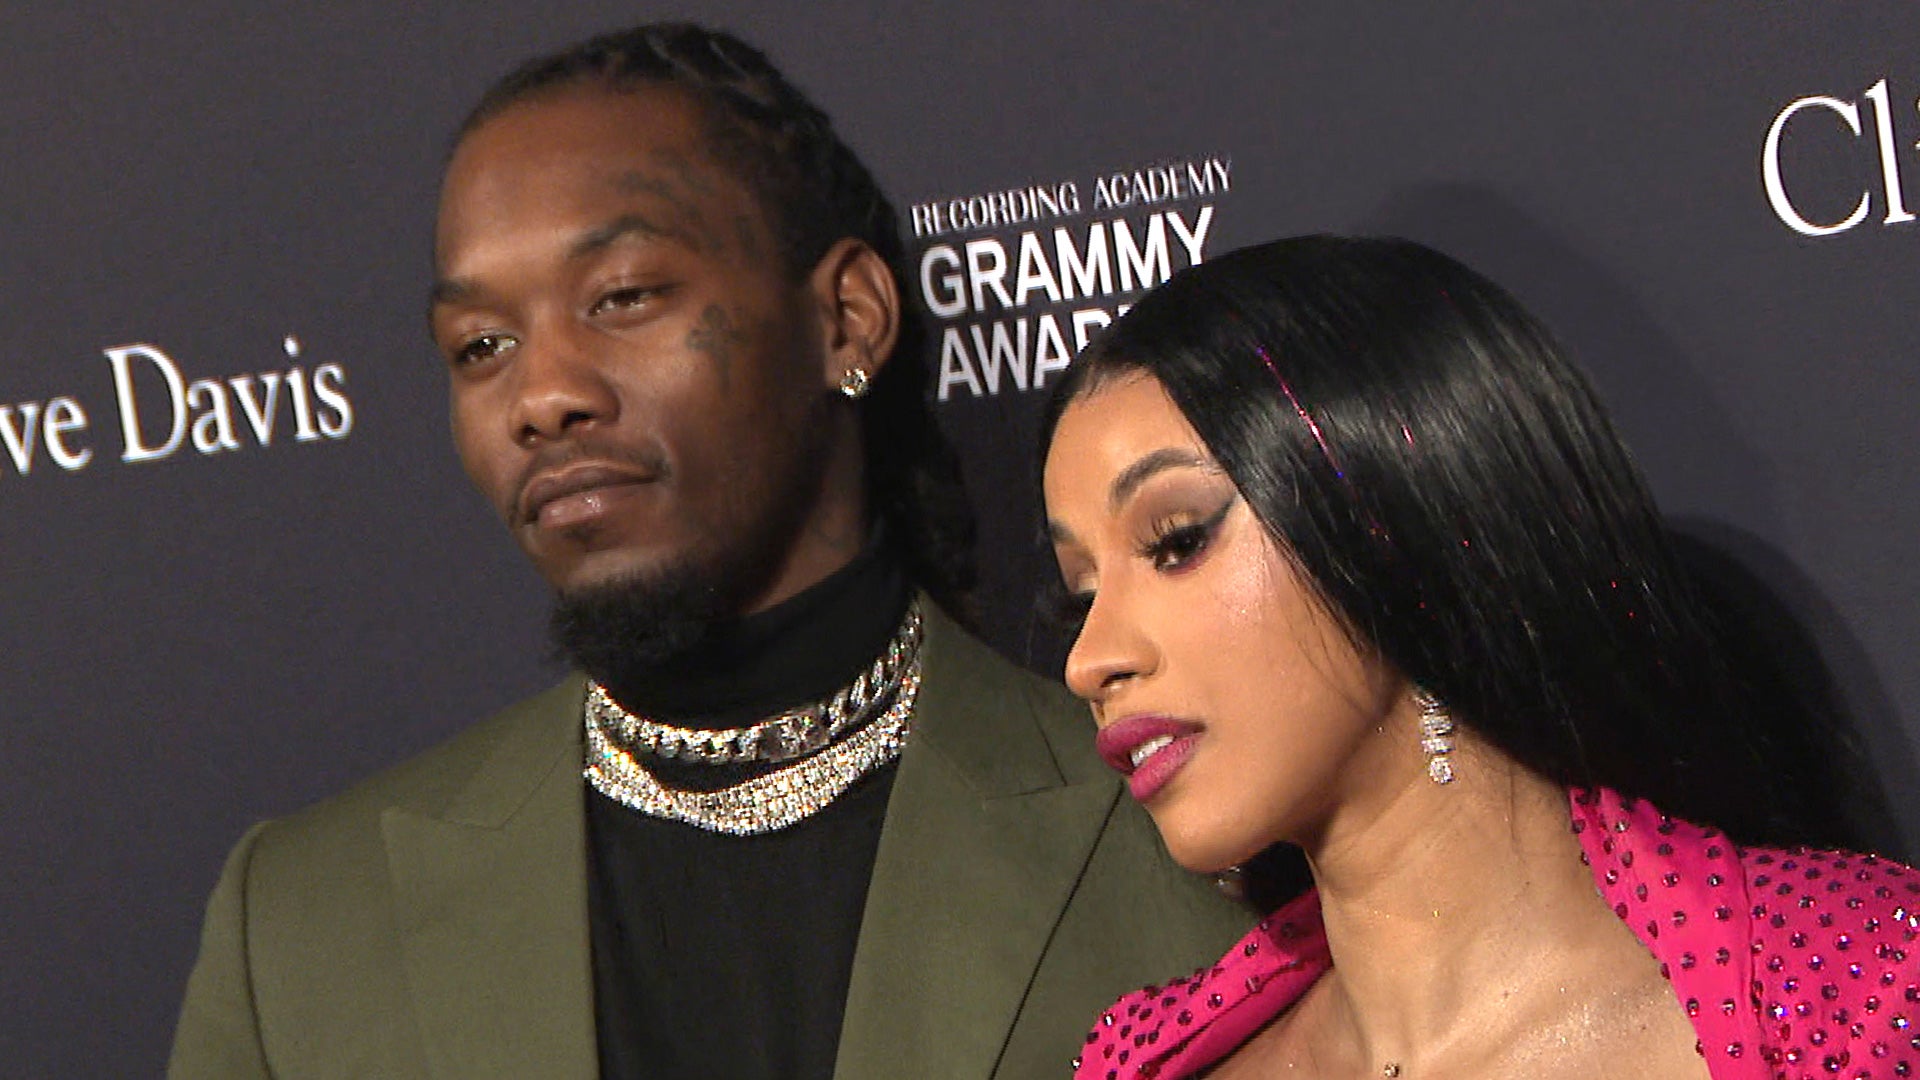 Cardi B Rocks Pink Dress On Mother's Day Date With Offset & Kulture –  Hollywood Life